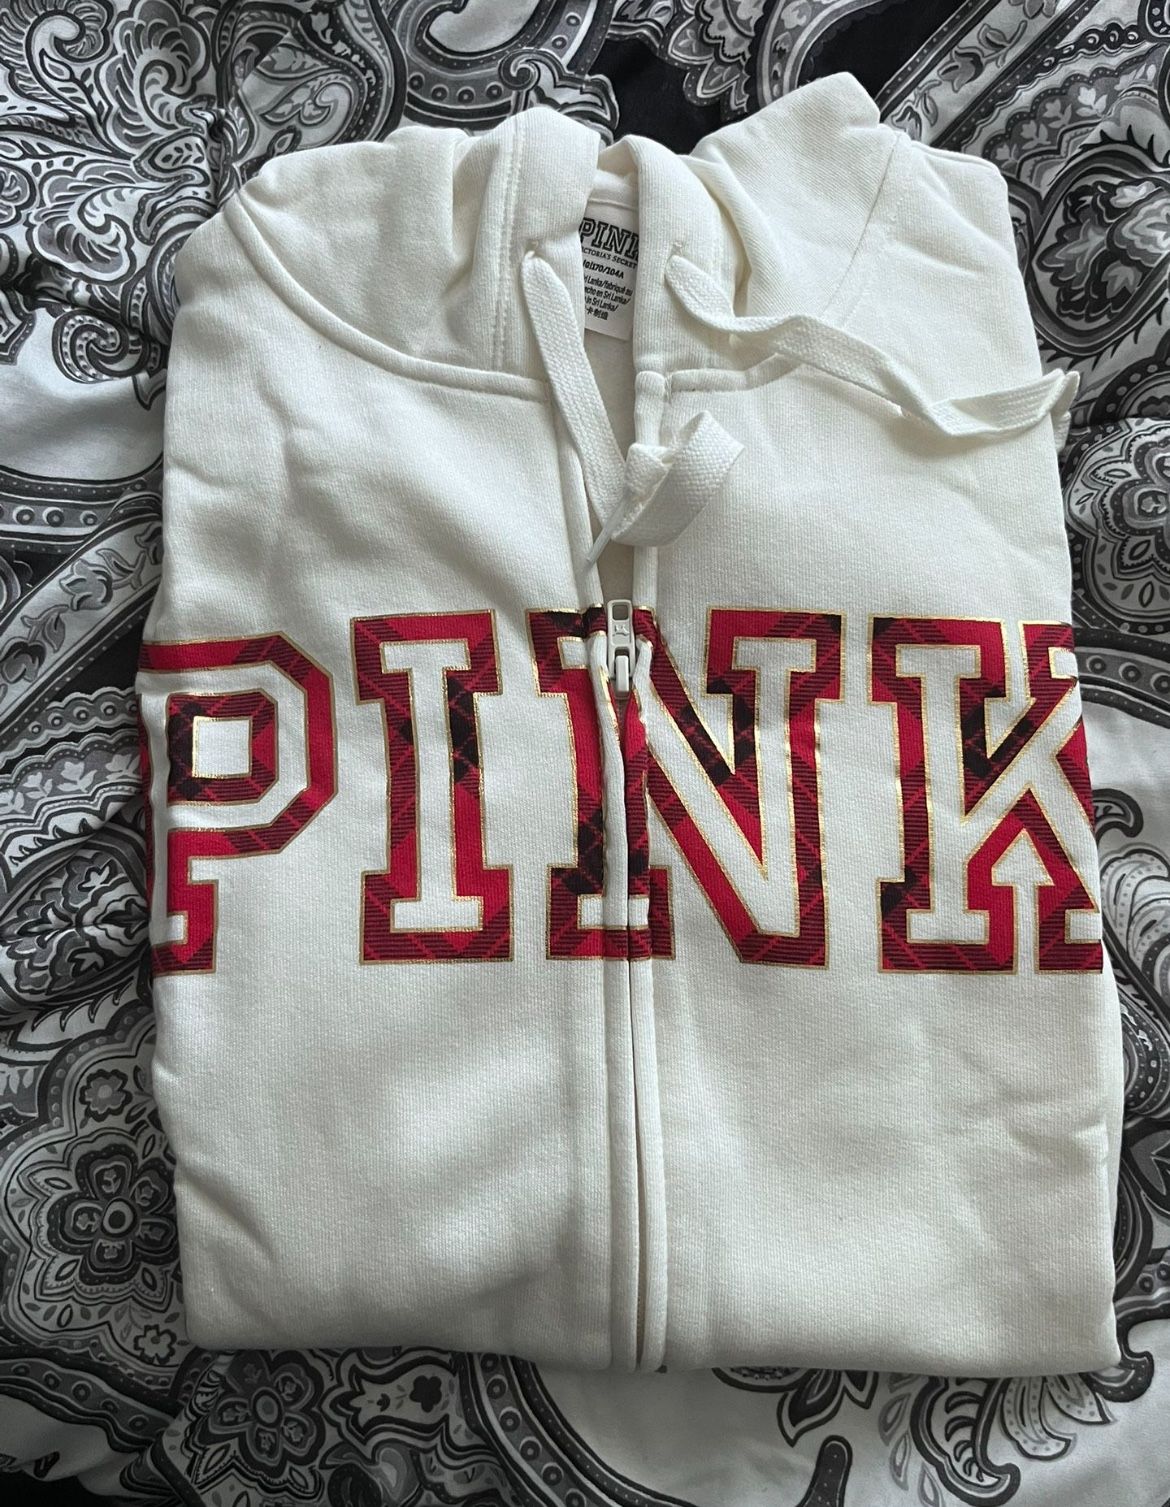 PINK hoodie- New Size Large 